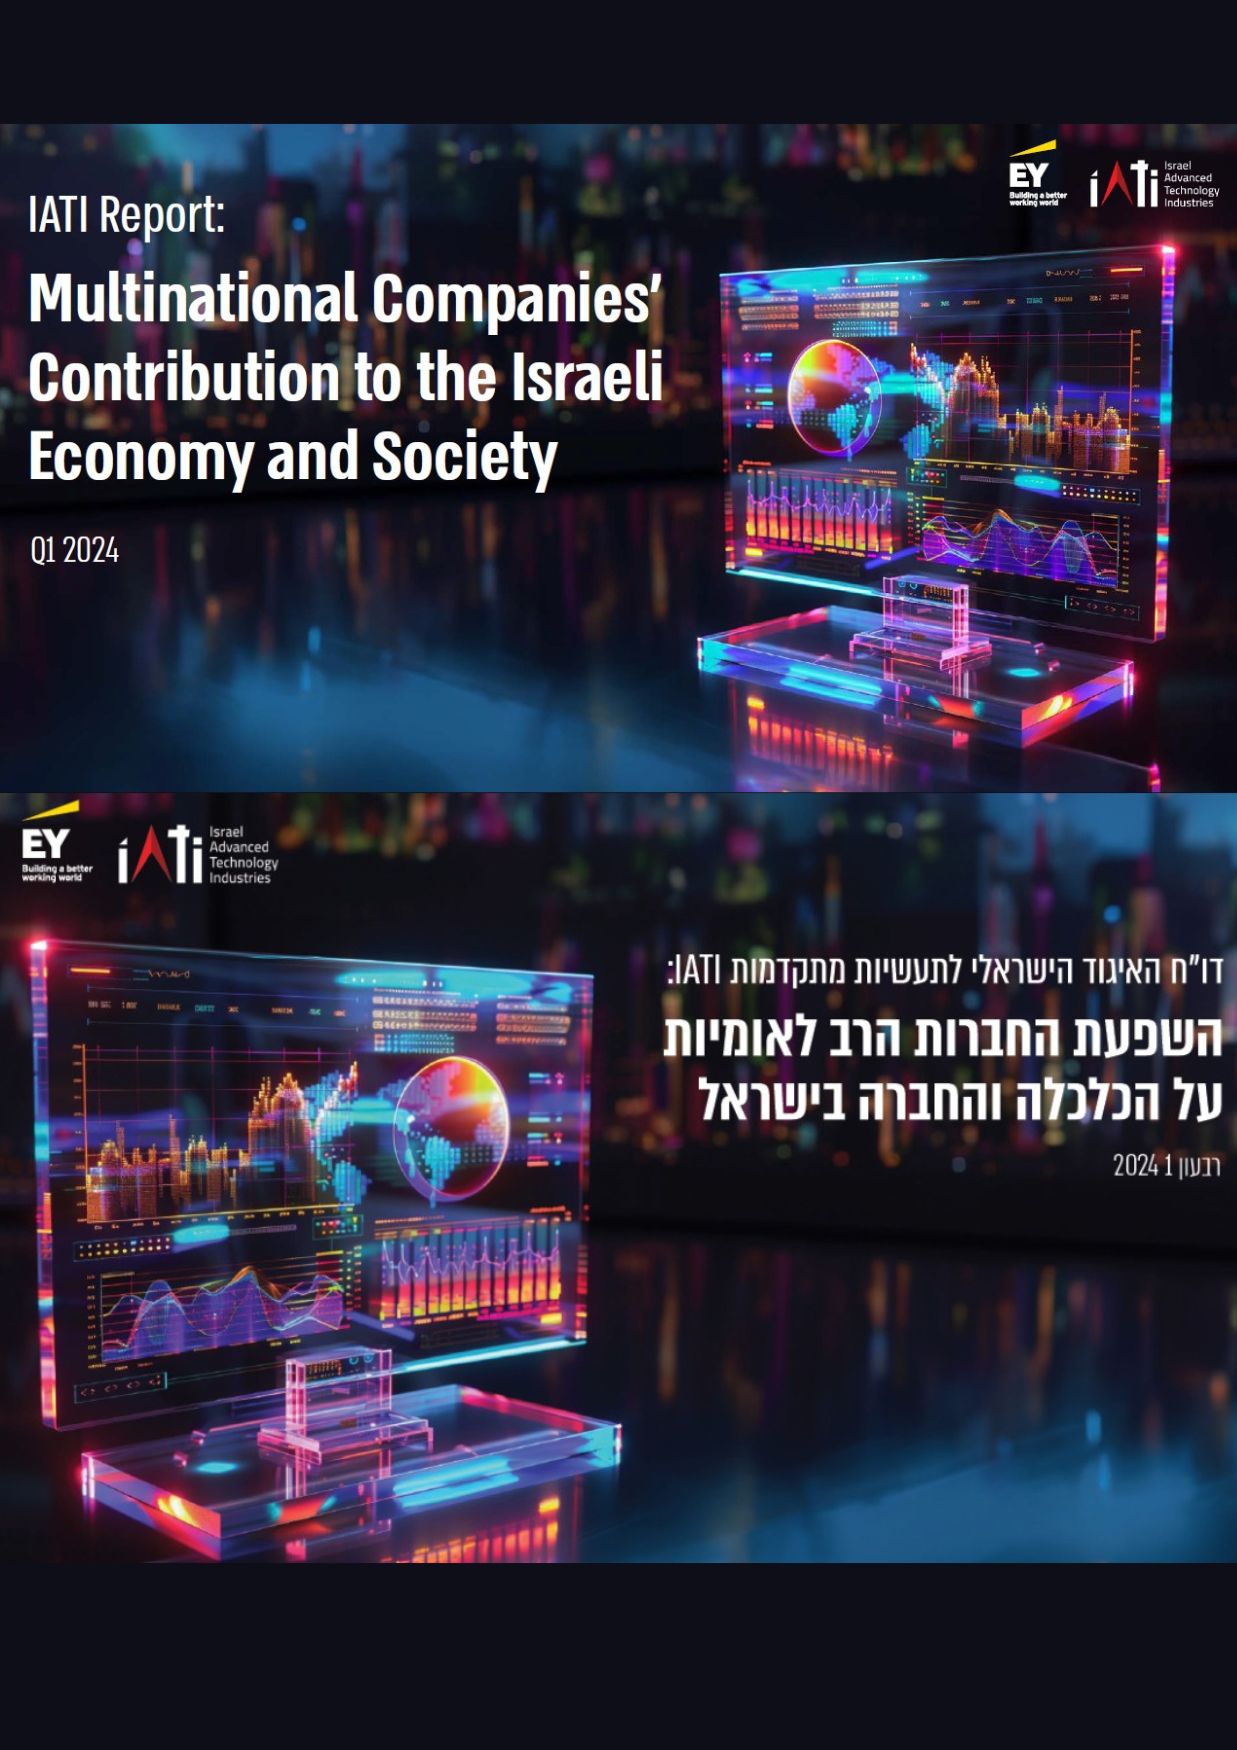 IATI Report: Multional Companies Contribution to the Israel Economy and Society